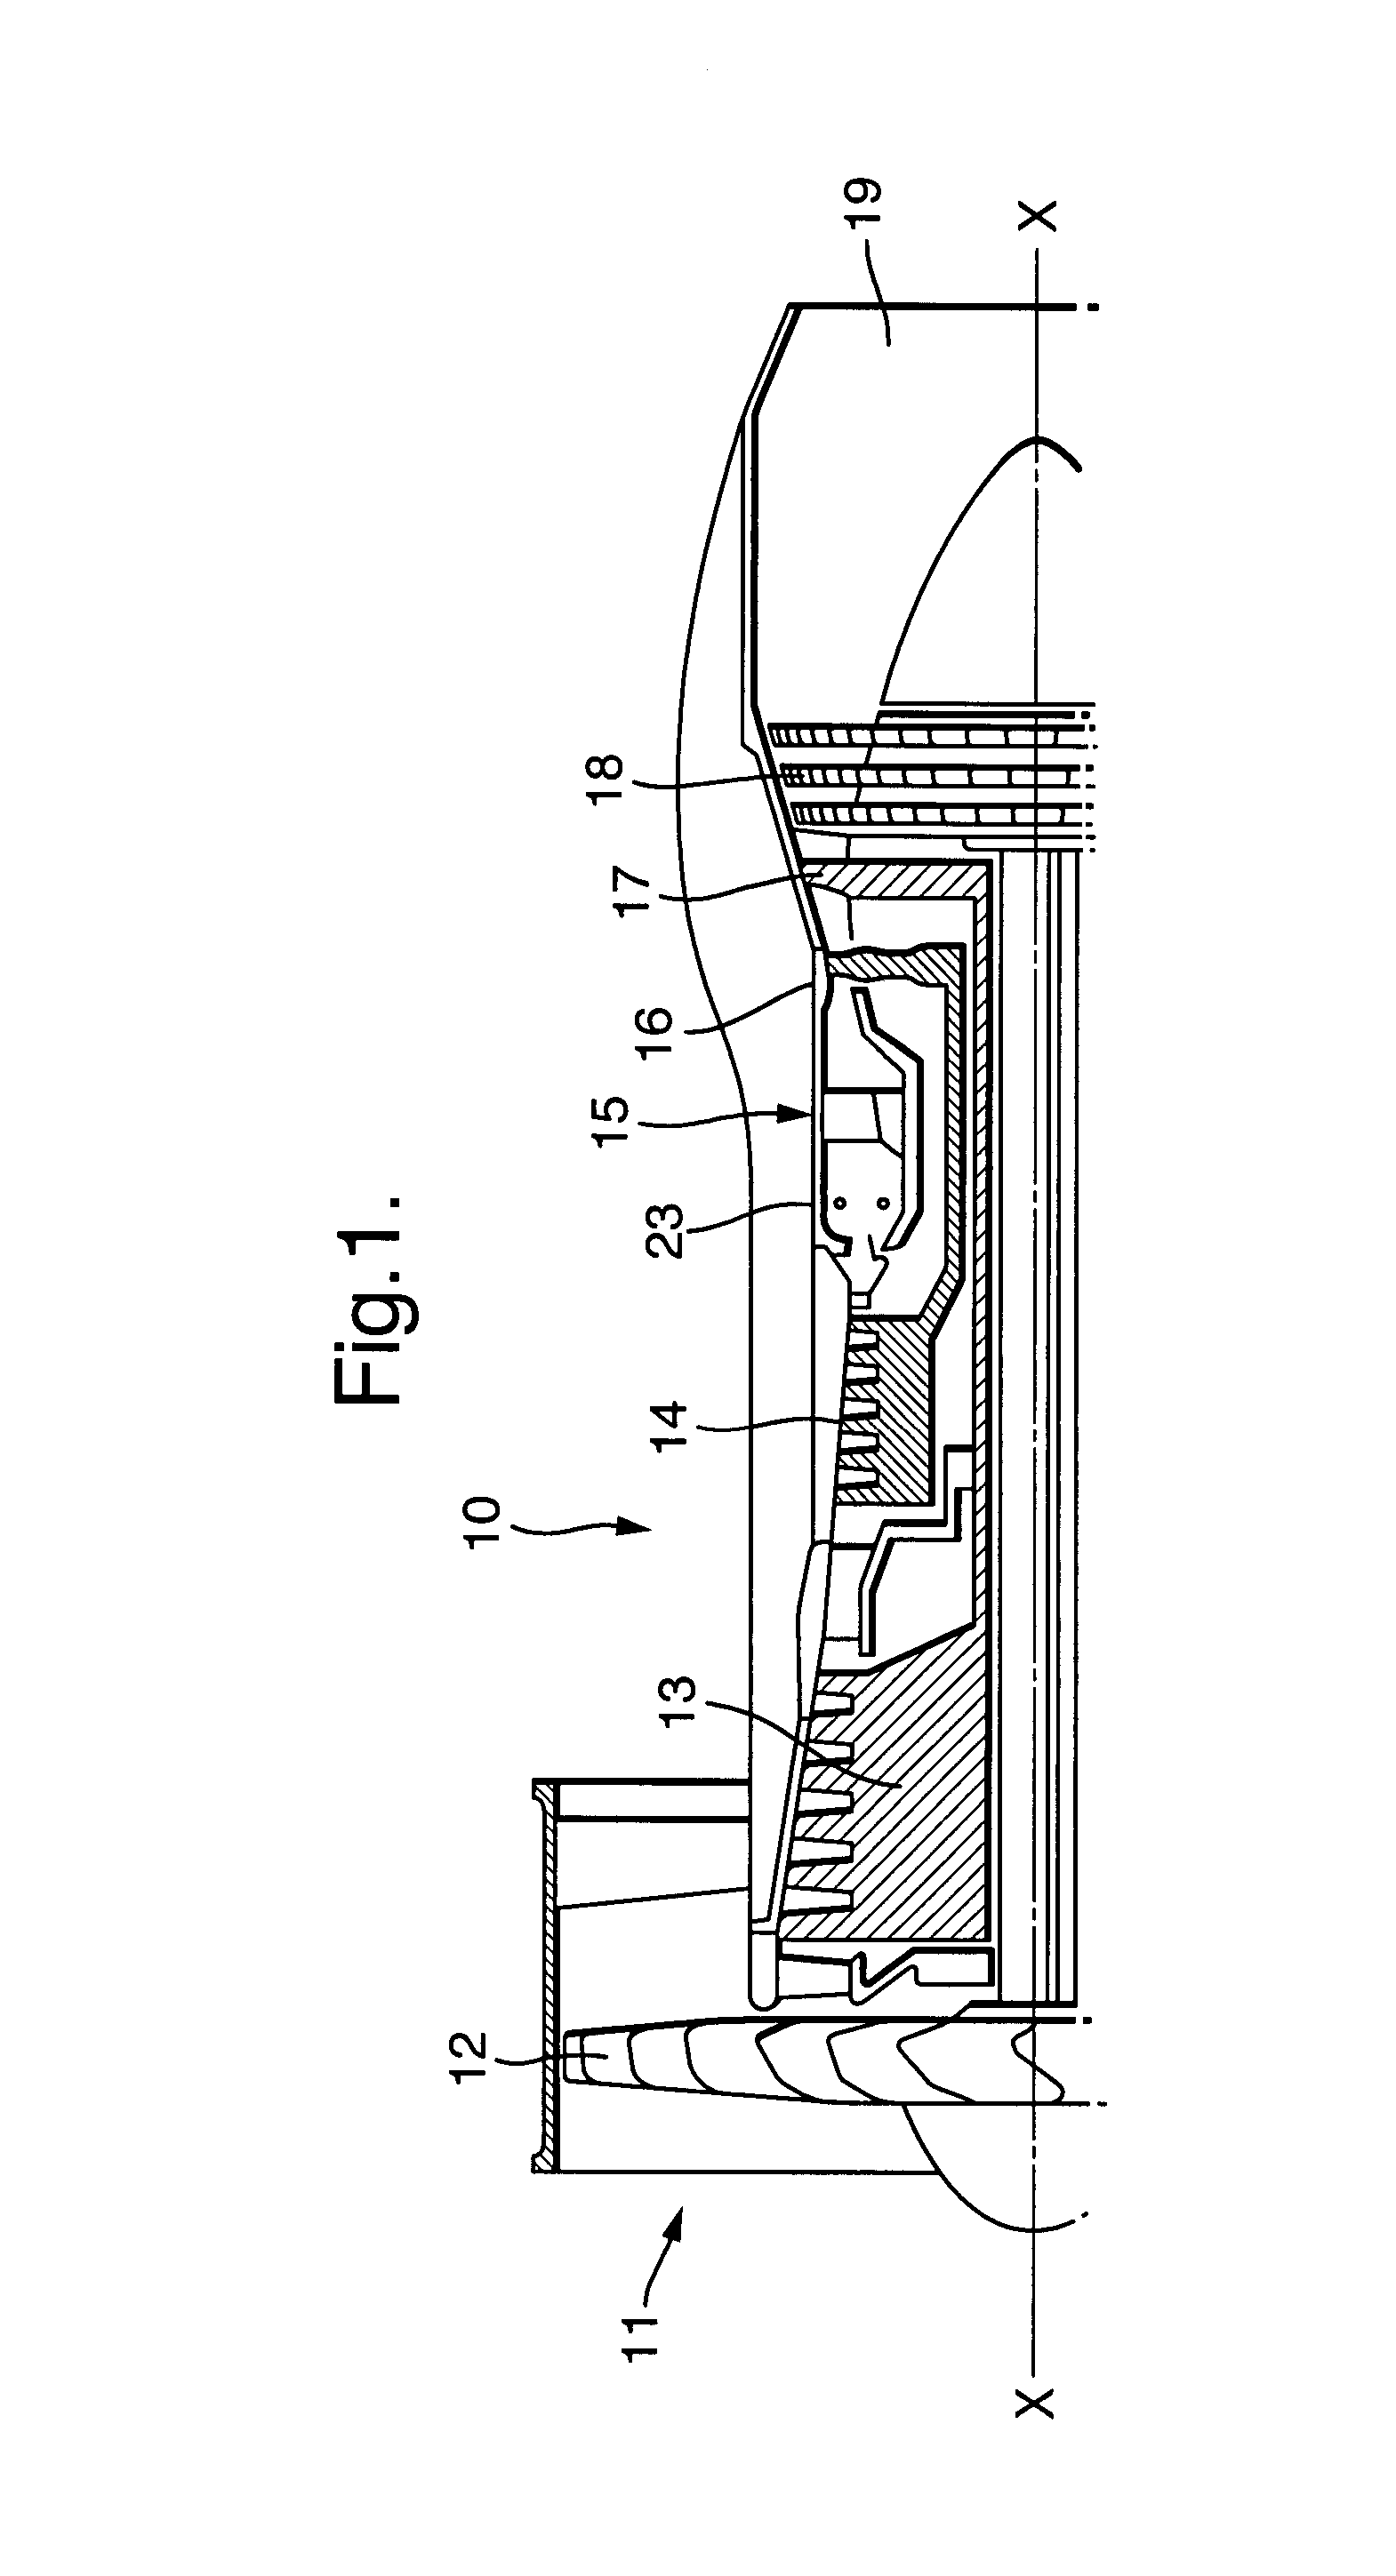 Clearance control apparatus